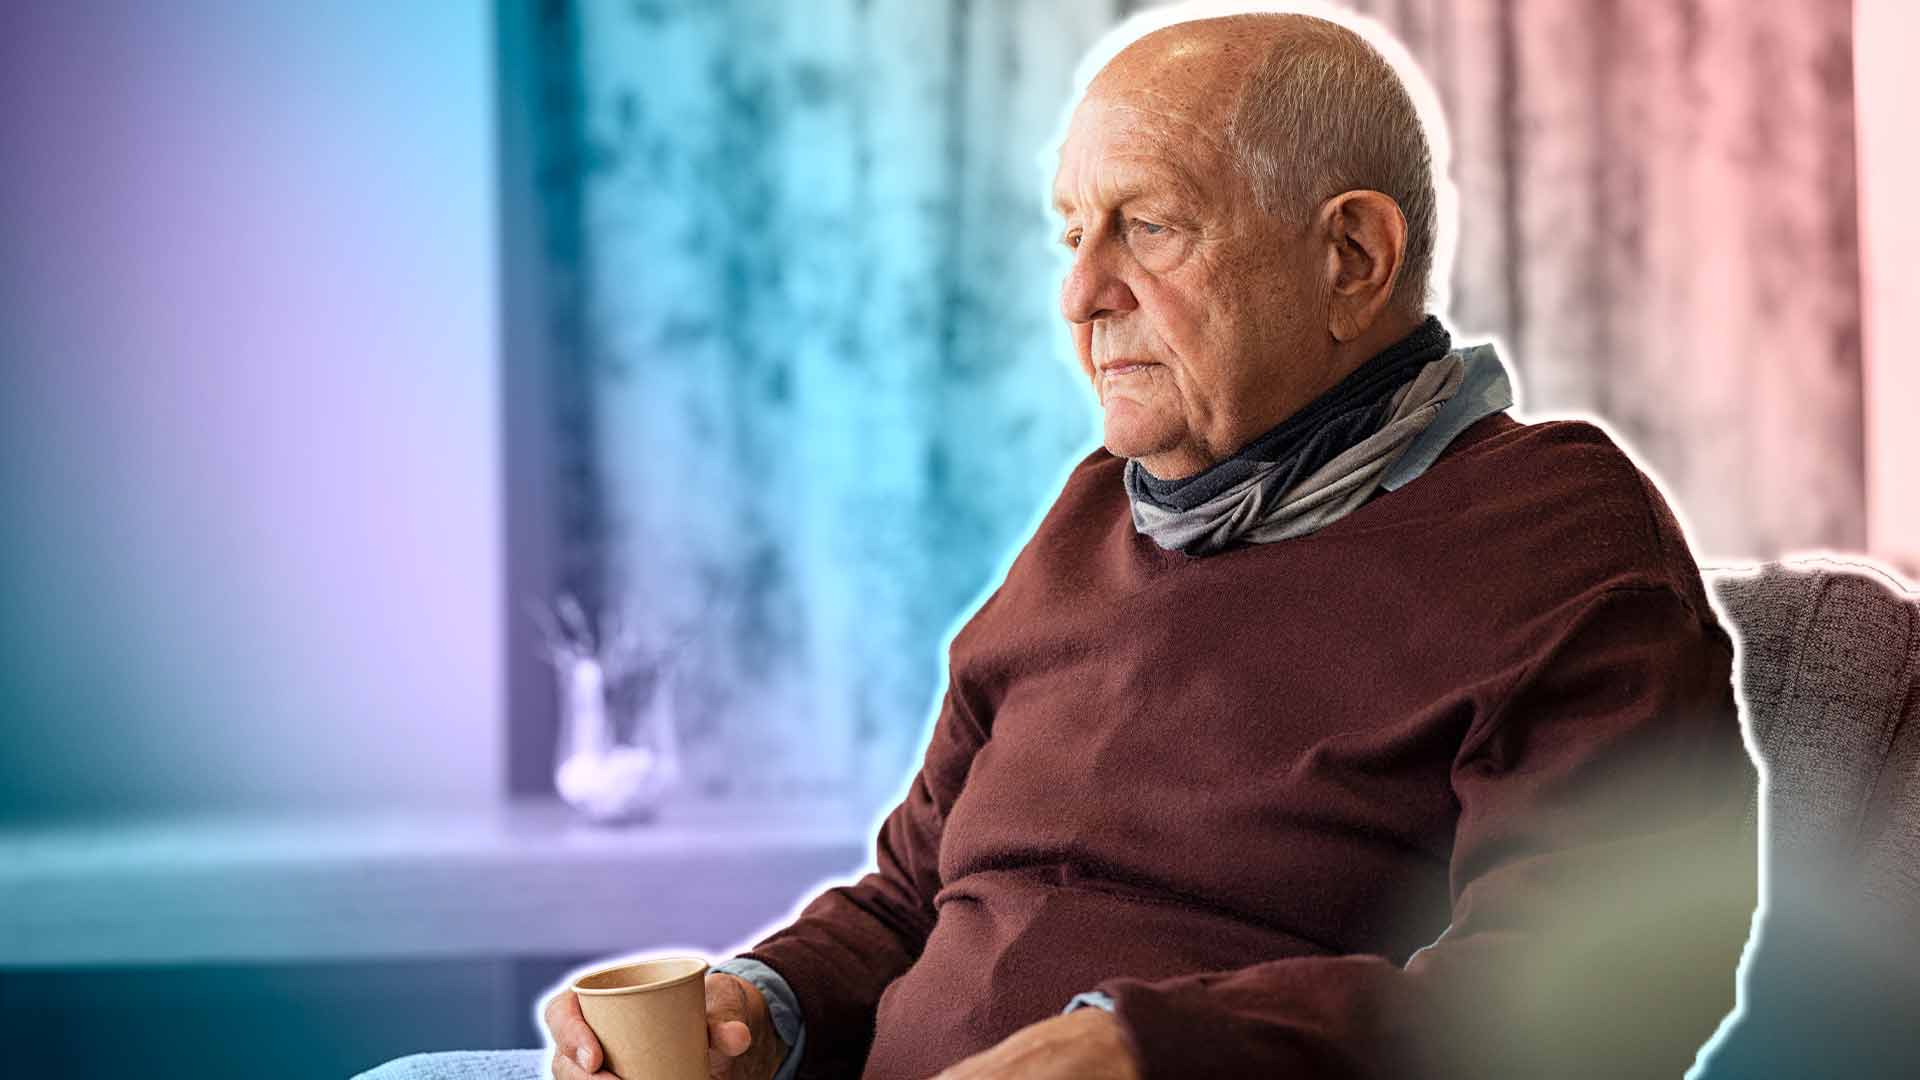 old guy drinking alone in nursing home